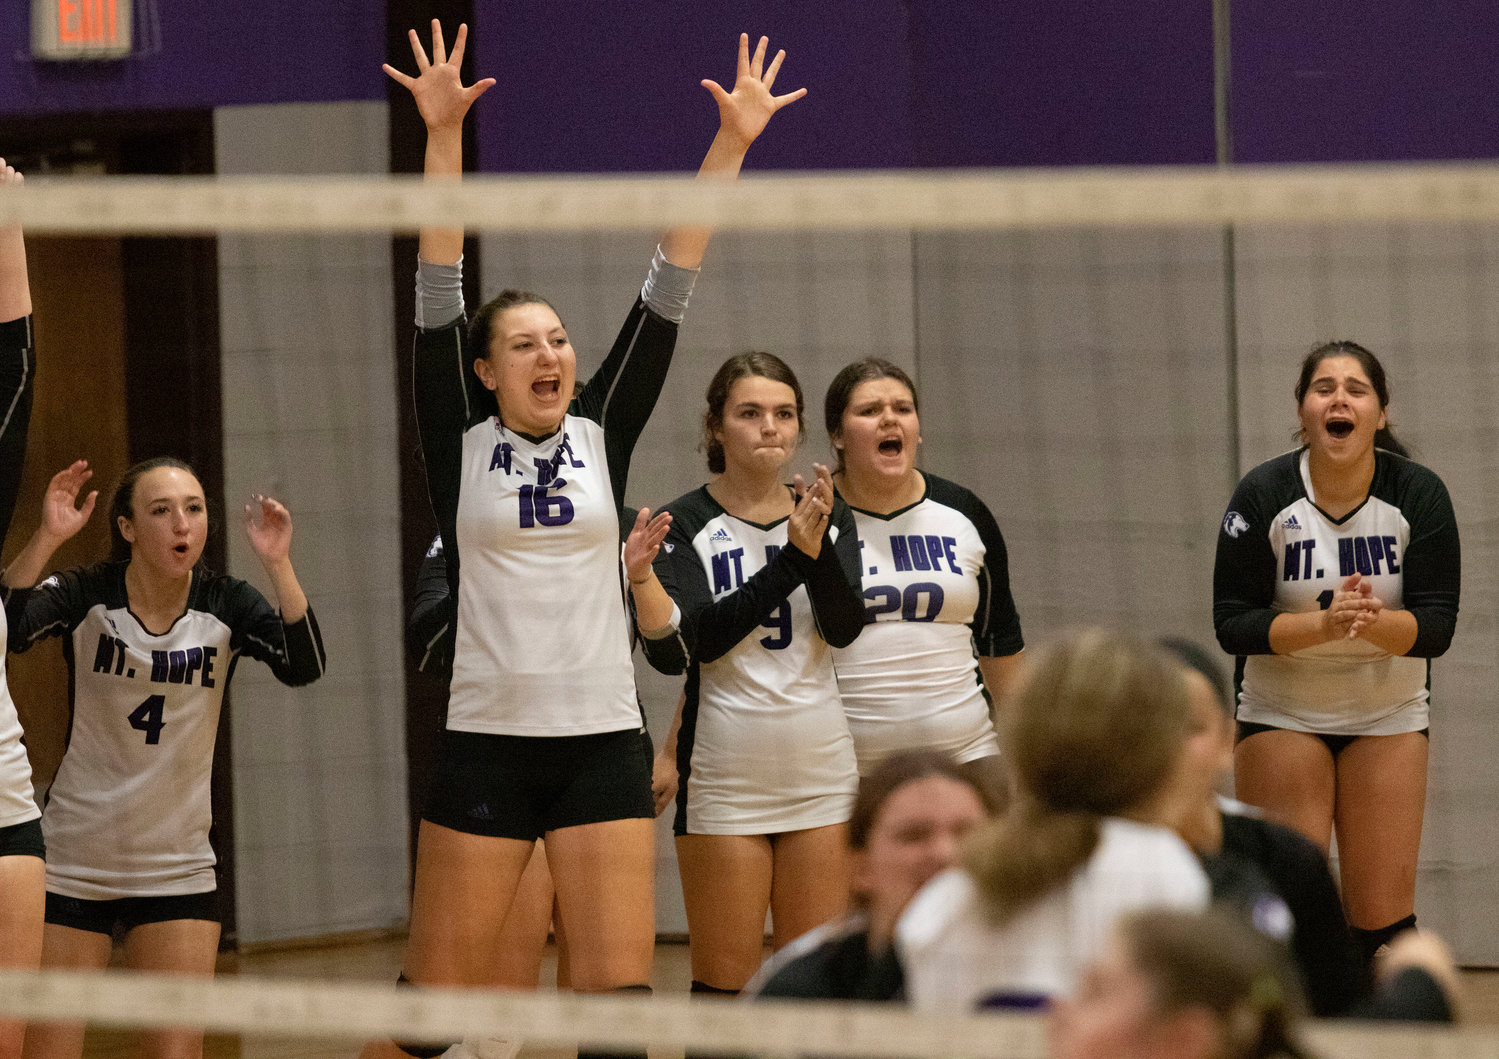 Gwenth Tucker (left (4)), Abby Allen, Sydney Withers, Nylah Terra and others celebrate after an improbable Huskies point on Friday night.